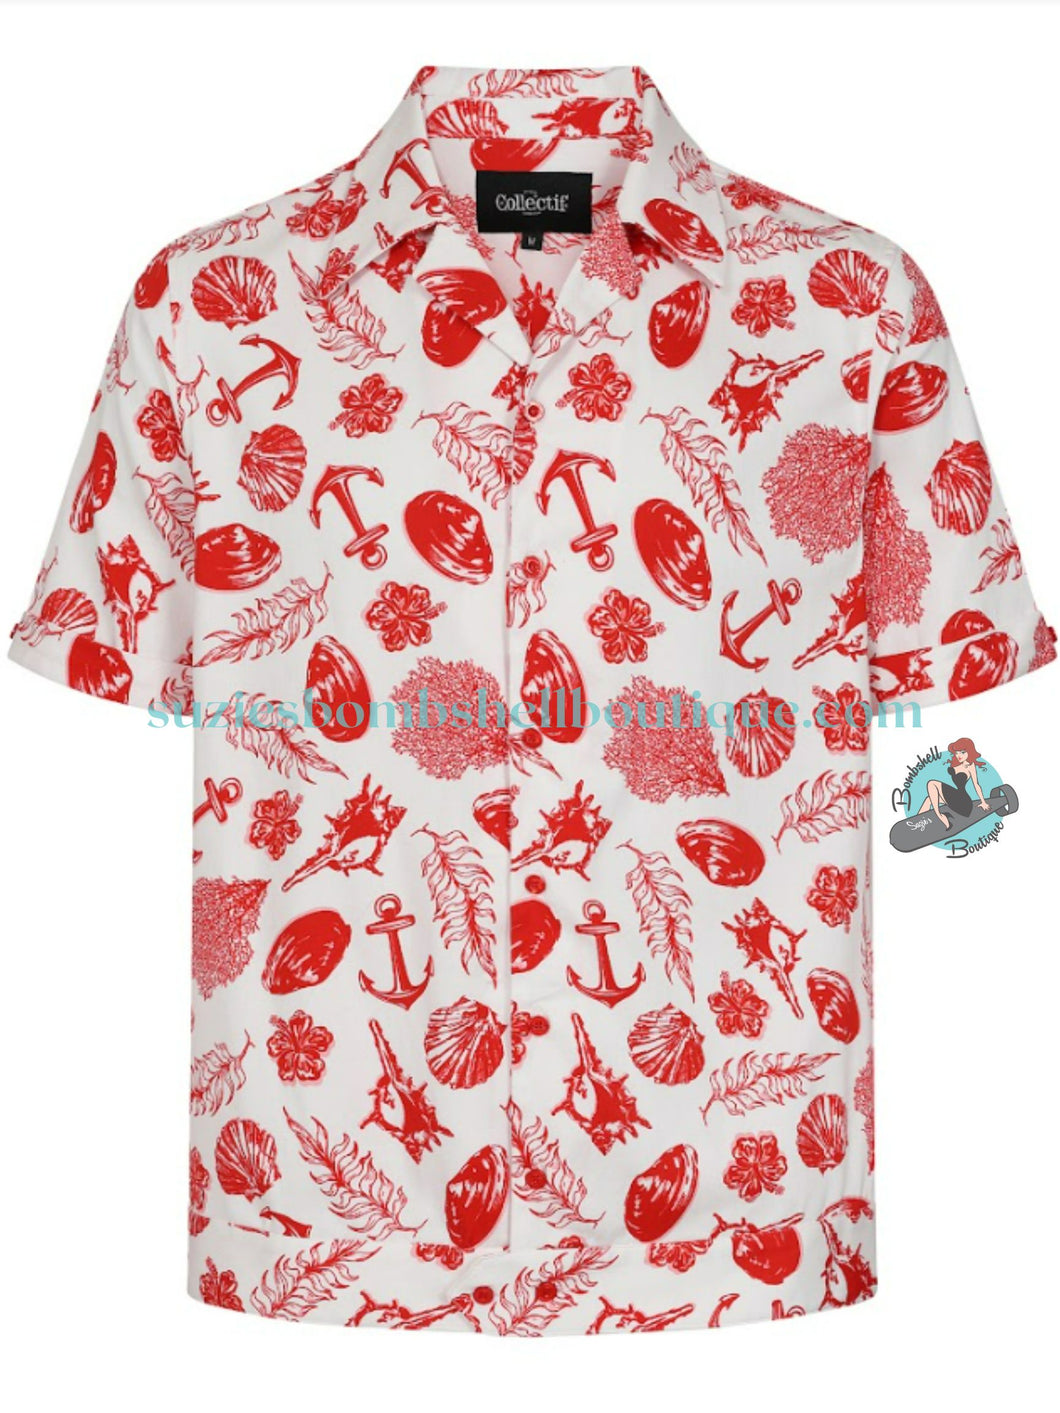 Collectif David Sea Shore Men's Shirt cotton button up shirt for men with white and red nautical print retro vintage bowling shirt cabana shirt menswear men men's retro vintage 50s shirt rockabilly tiki Canadian Pin-Up Shop Suzie's Bombshell Boutique